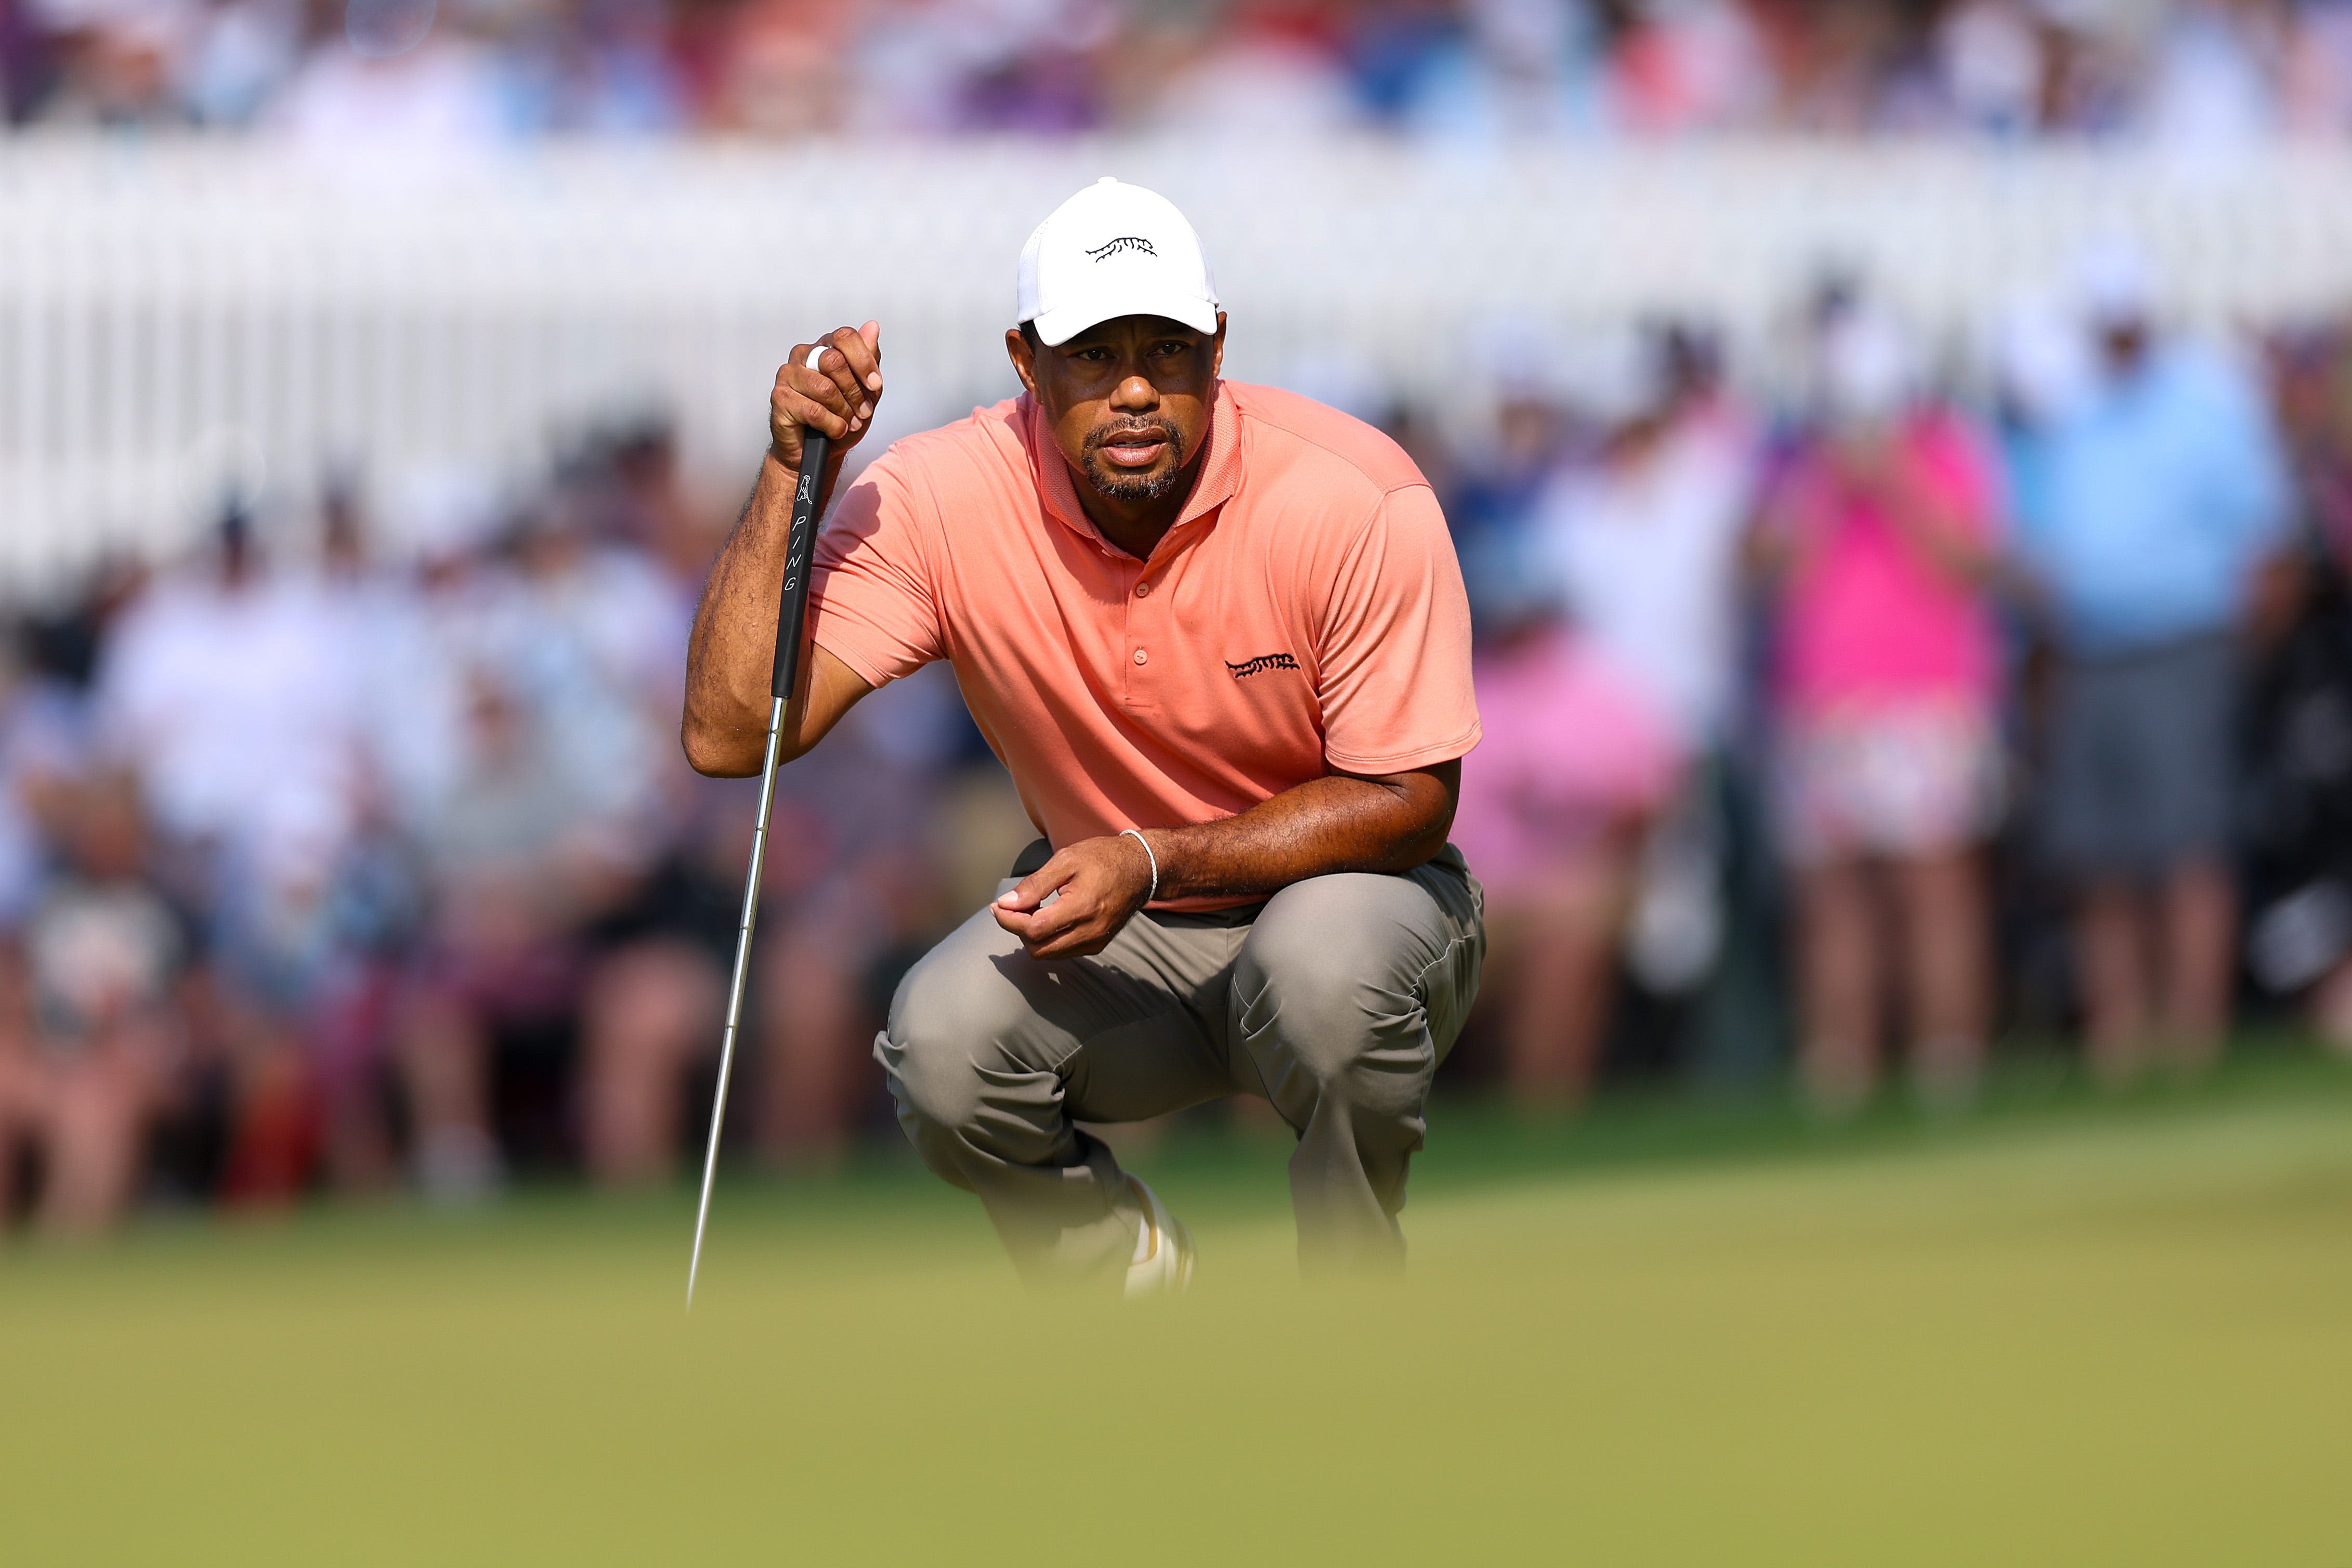 Tiger Woods tracker: Score and updates for golf icon from Round 2 at PGA Championship